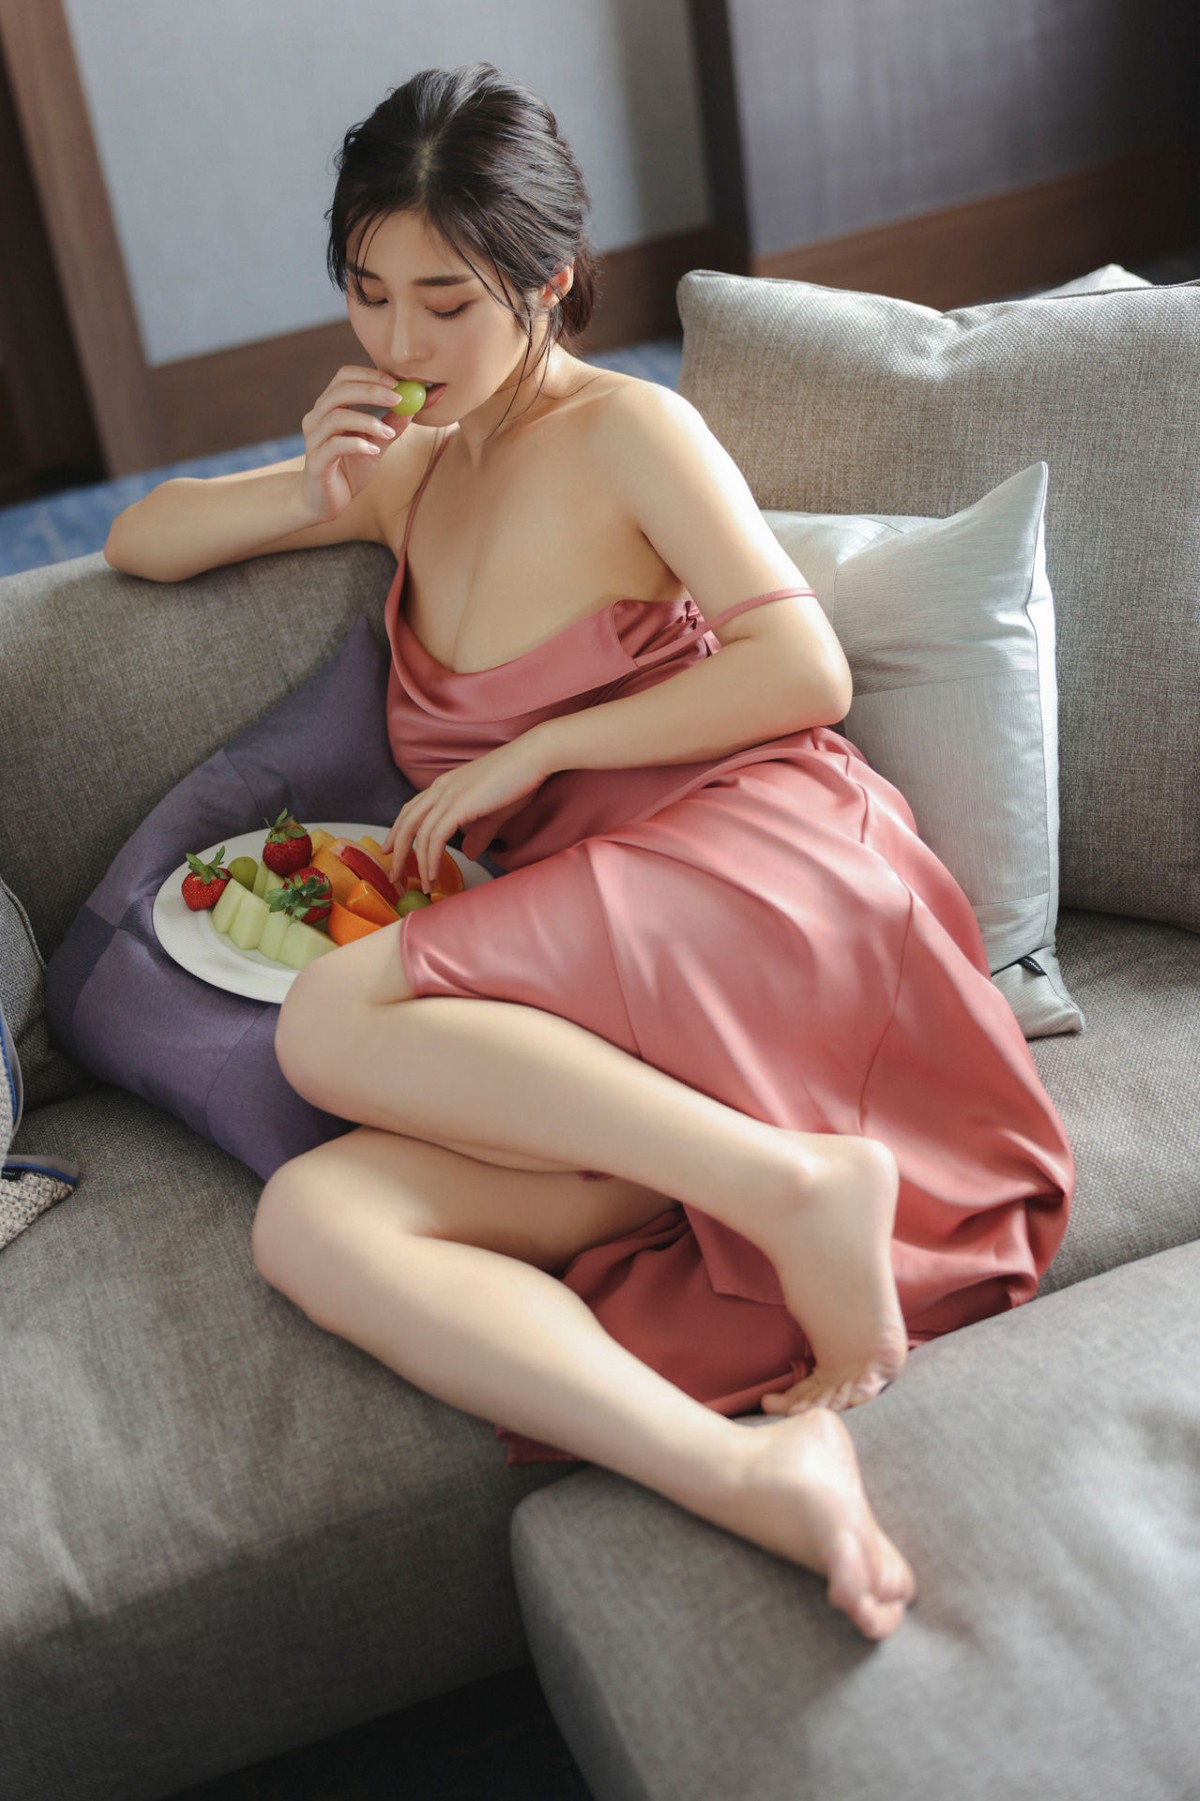 FRIDAY Digital Photobook 2023 02 10 Rin Takahashi 高橋凛 In A Suite Room With An I Cup Beauty Vol 2 0060 7580123917.jpg